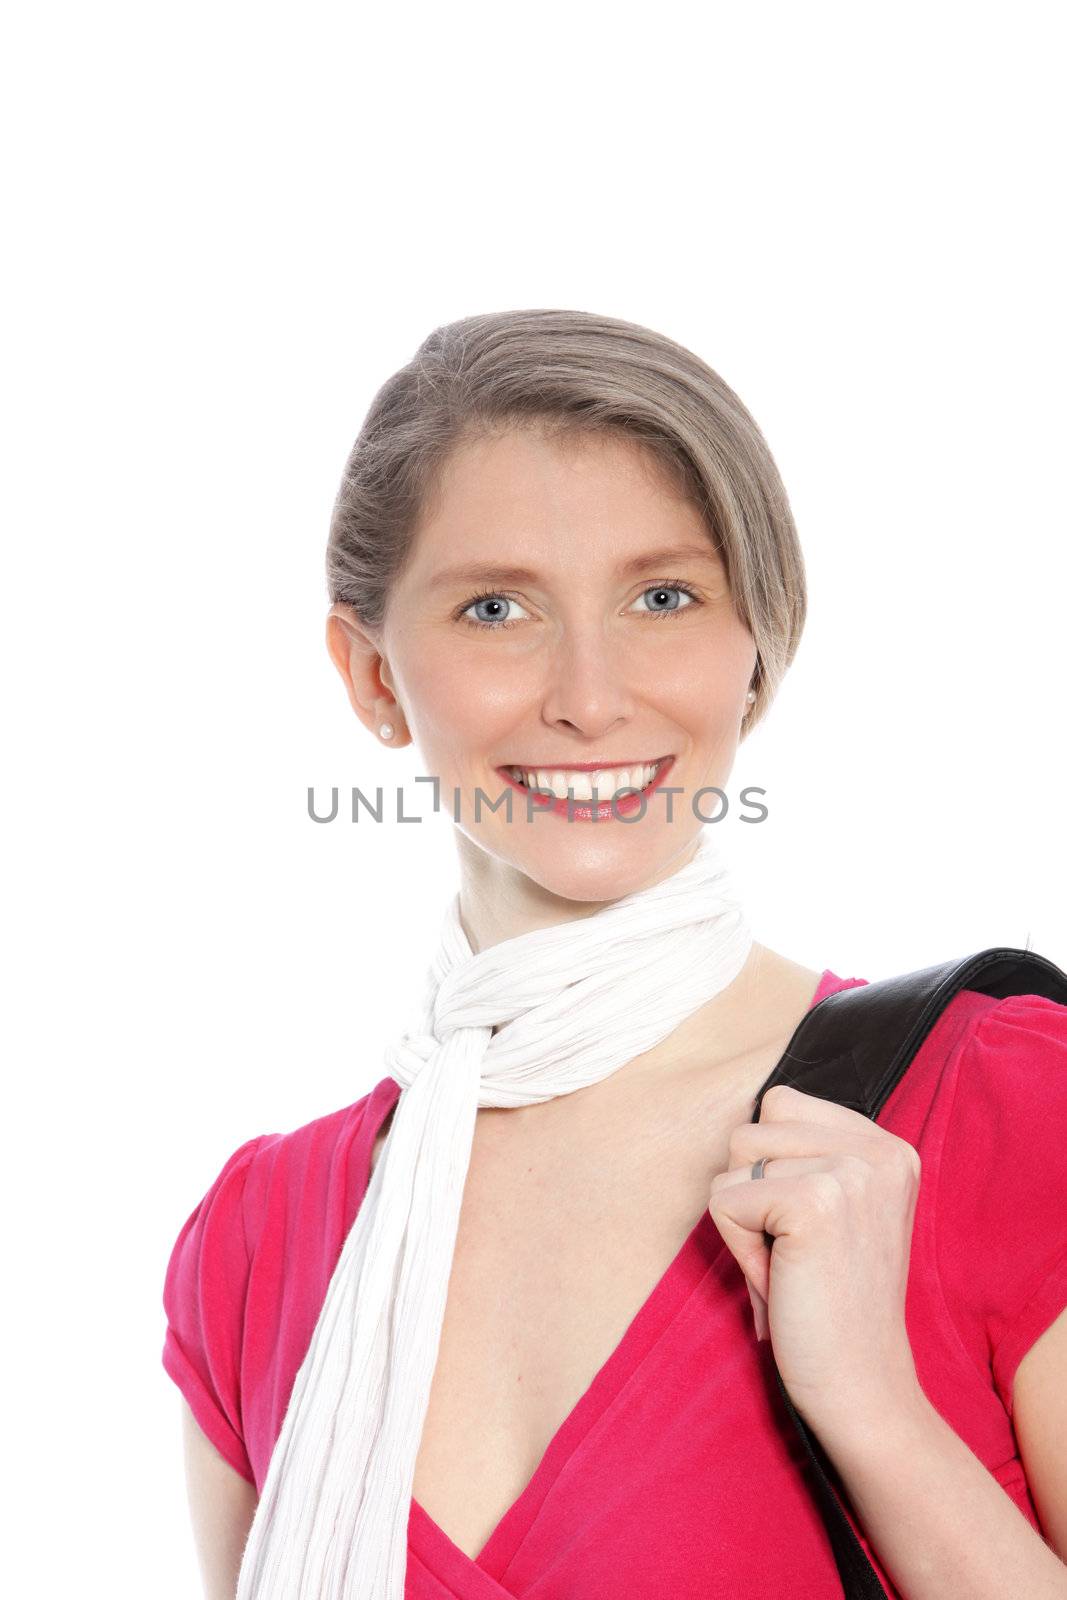 Elegant smiling slender woman wearing a red summer top and decorative scarf looking down at the camera with a wide smile isolated on white